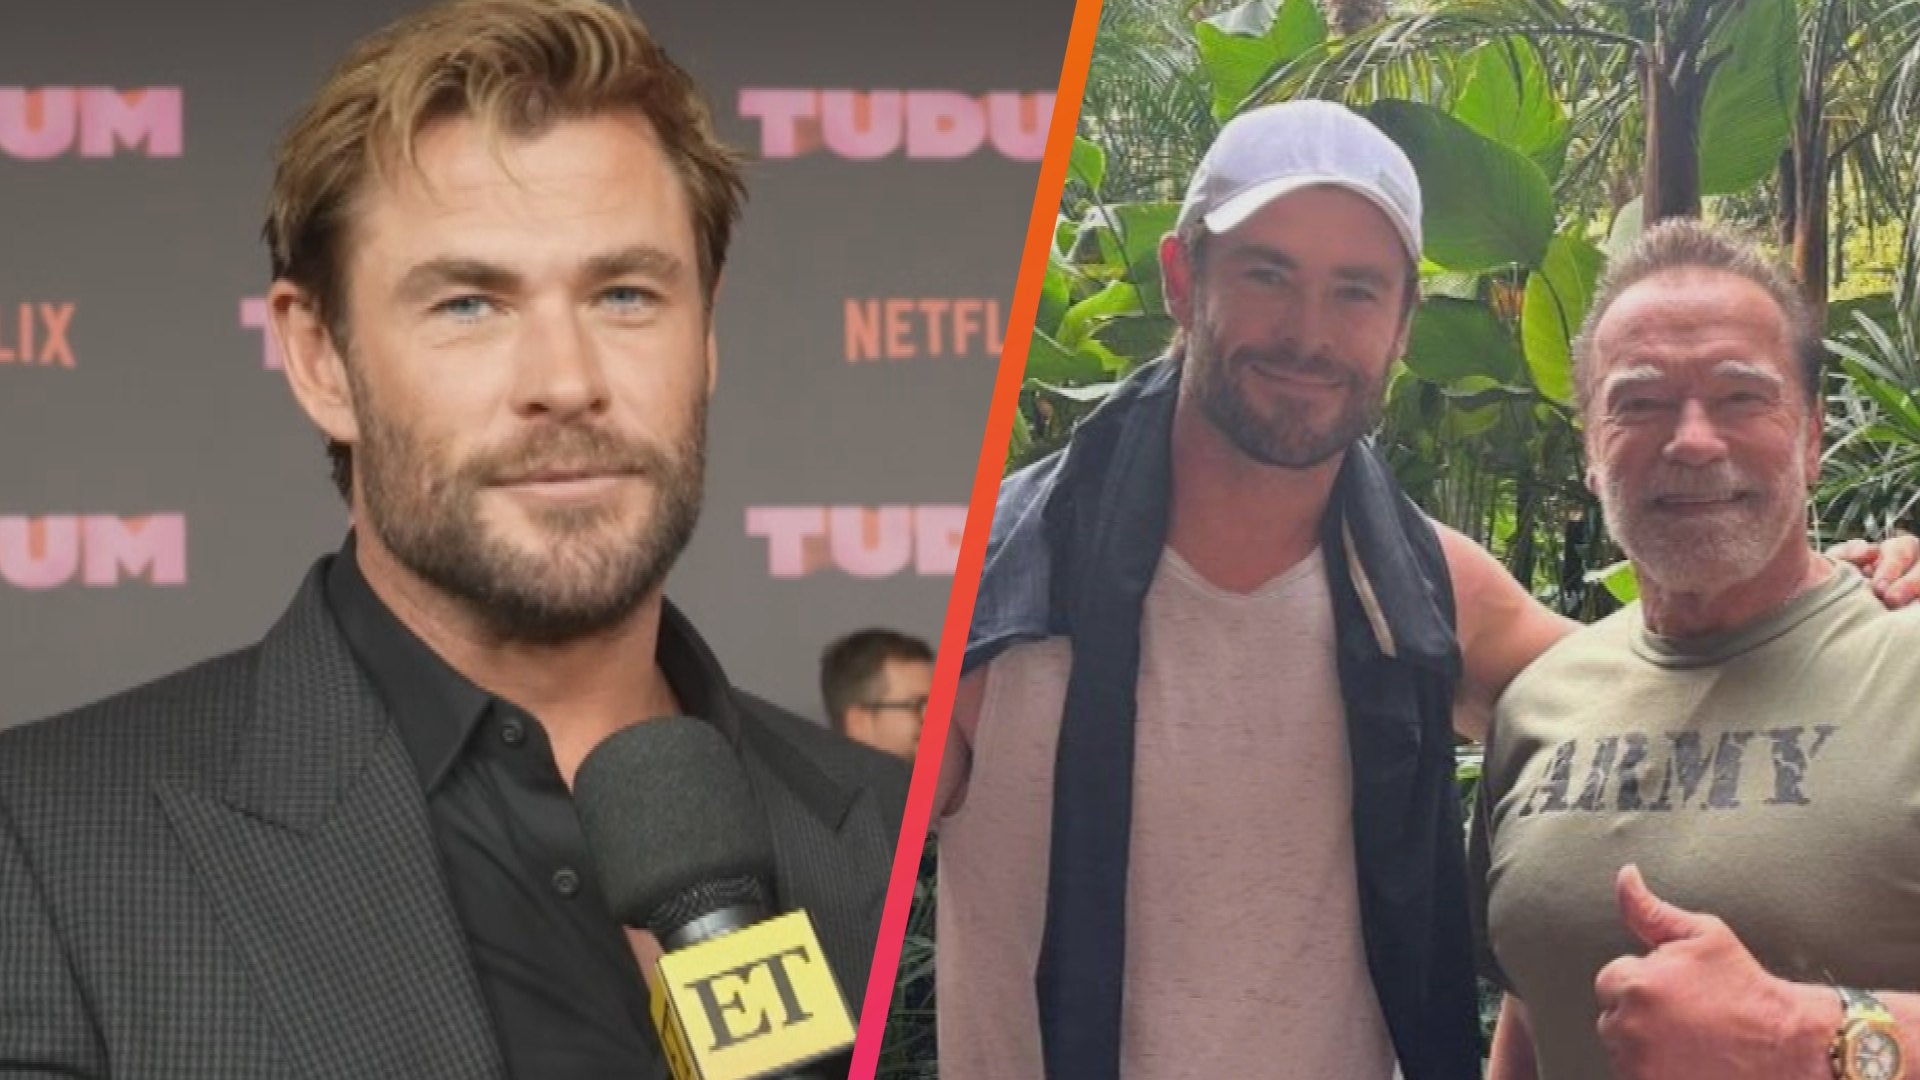 Chris Hemsworth Celebrates 40th Birthday by Surfing With Brother Liam Hemsworth -- See the Shirtless Pics Entertainment Tonight